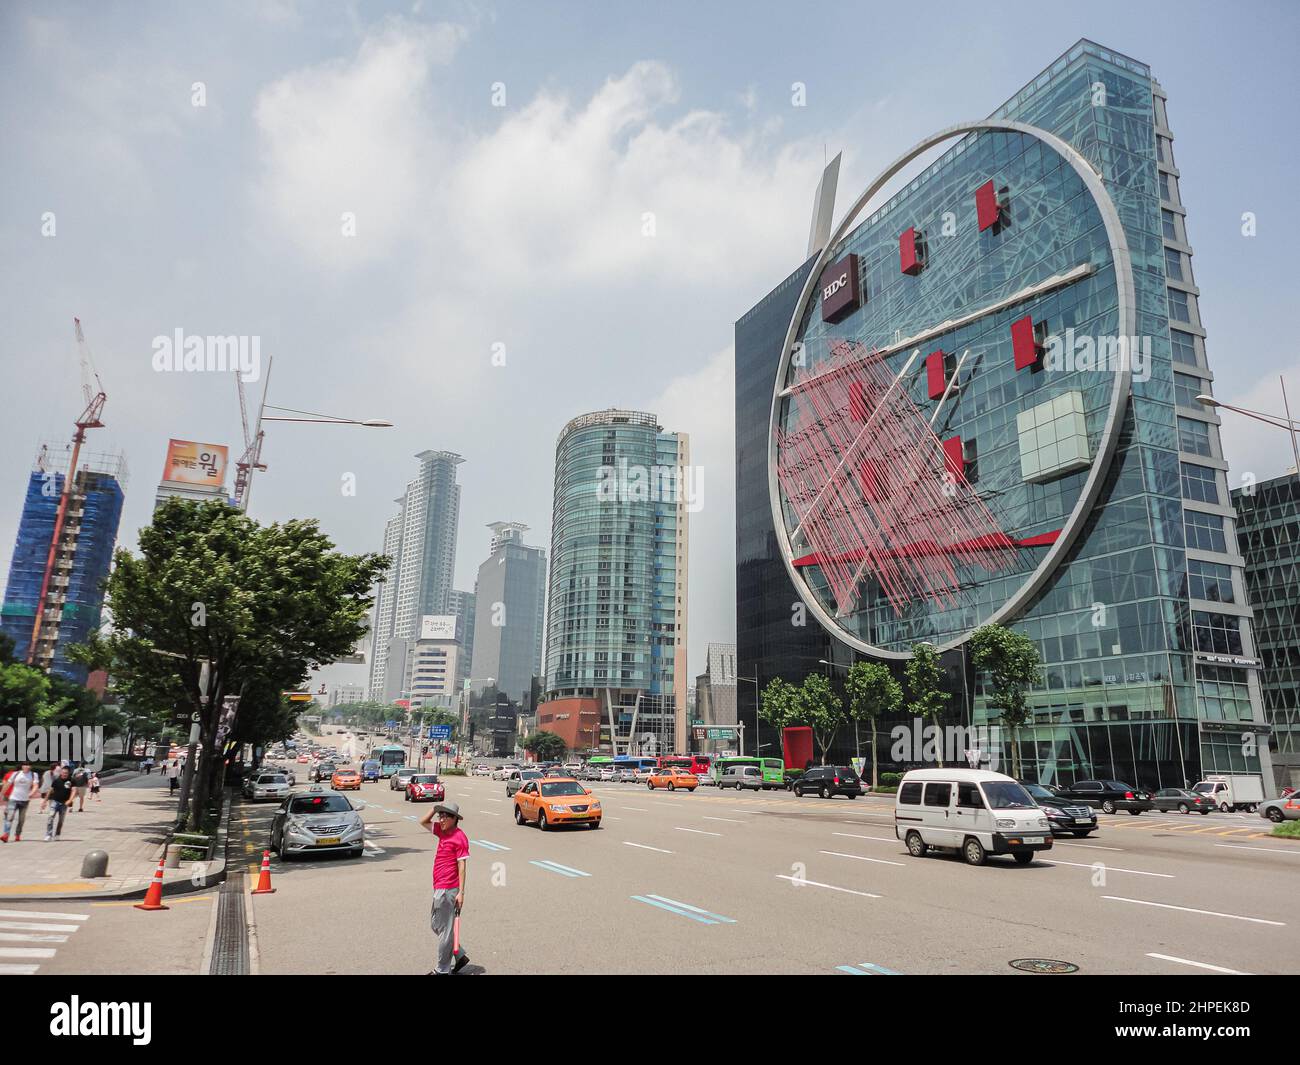 Seoul, South Korea - July 25, 2021: Traffic on the Yeongdong-daero street in front of the Tangent building at the Gangnam District. One of Seoul’s bol Stock Photo